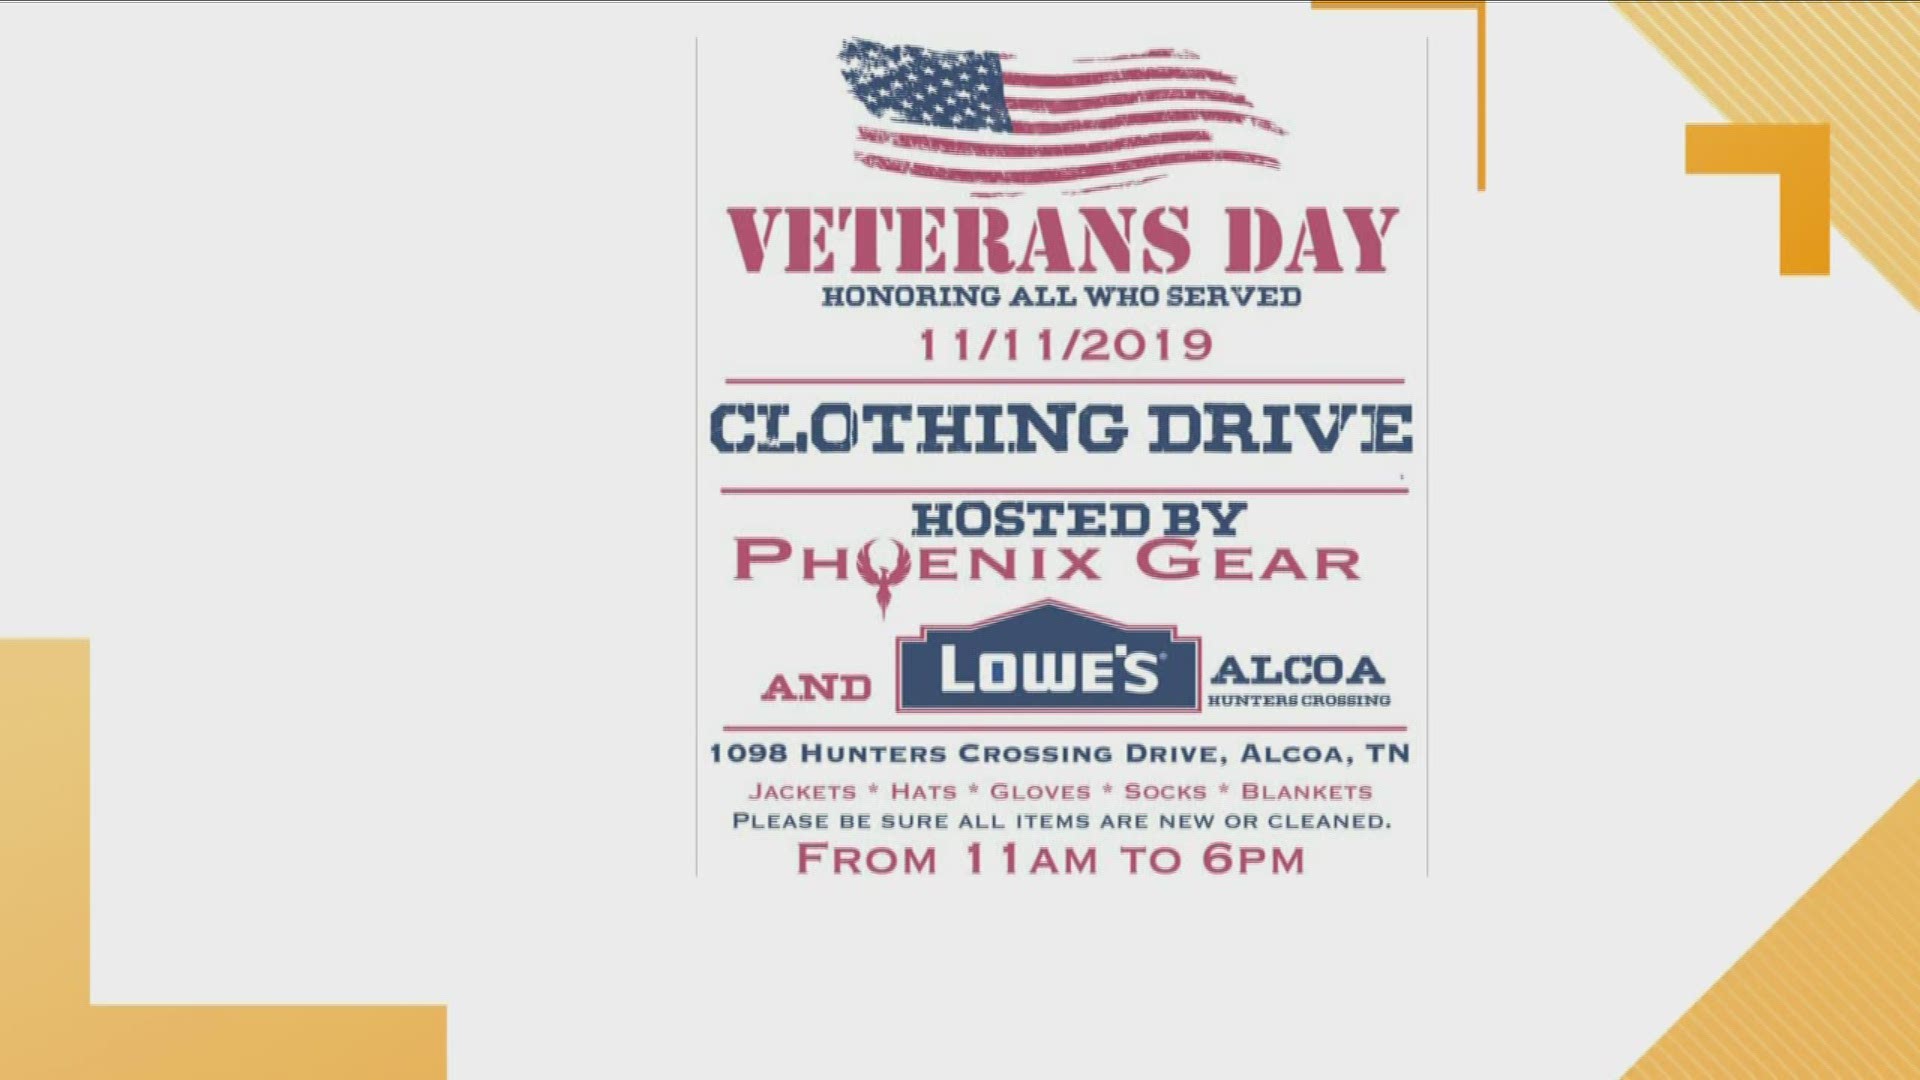 Josh Gagnier from Phoenix Gear shares how you can participate in a clothing drive for Veteran's Day.